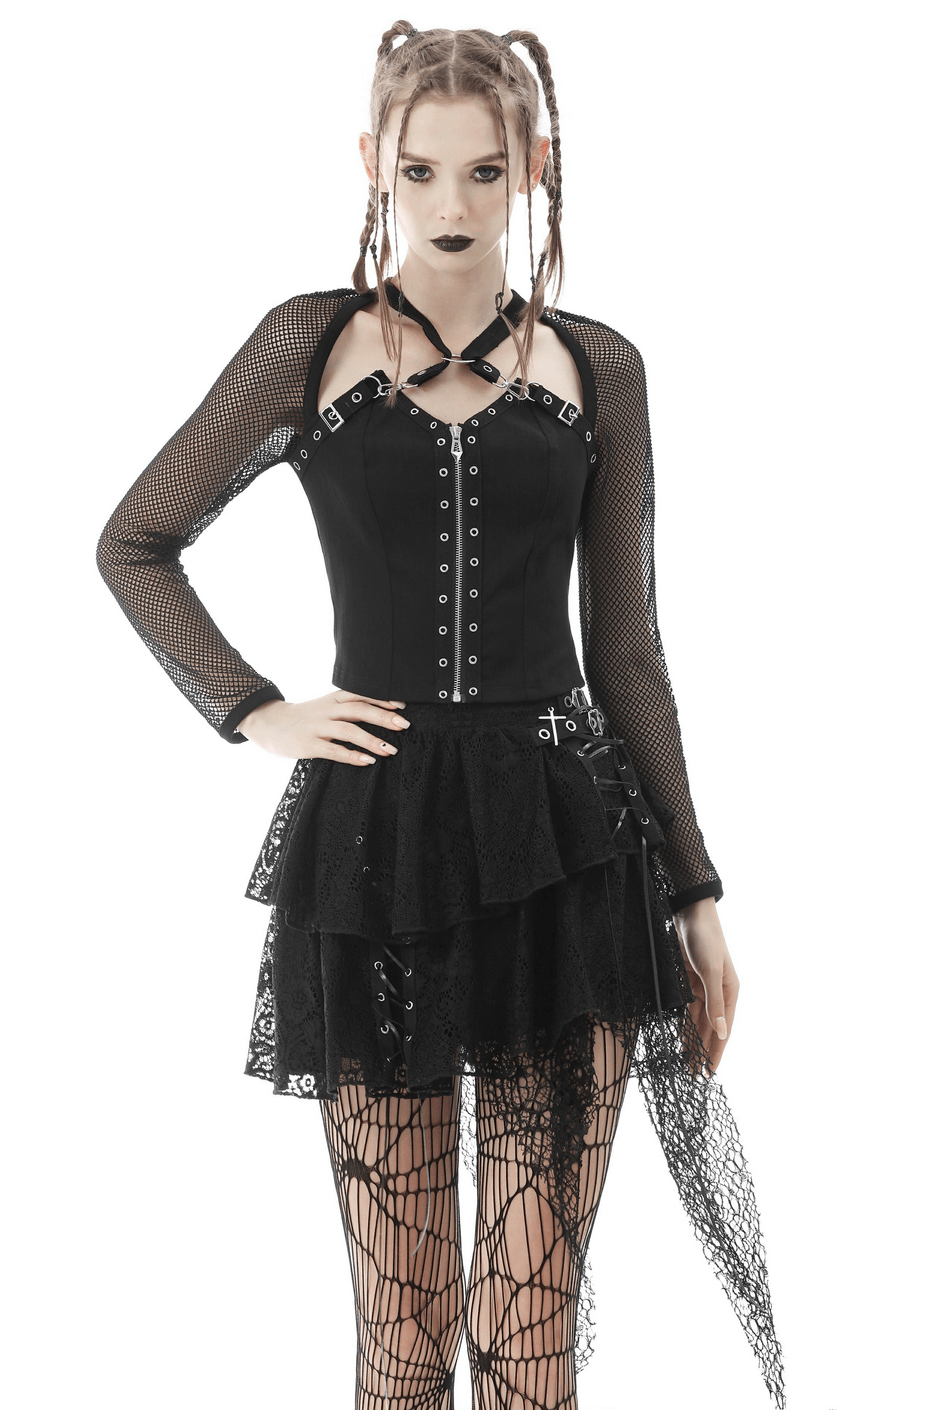 Gothic Black Zipper Mesh Top with Studded Detail